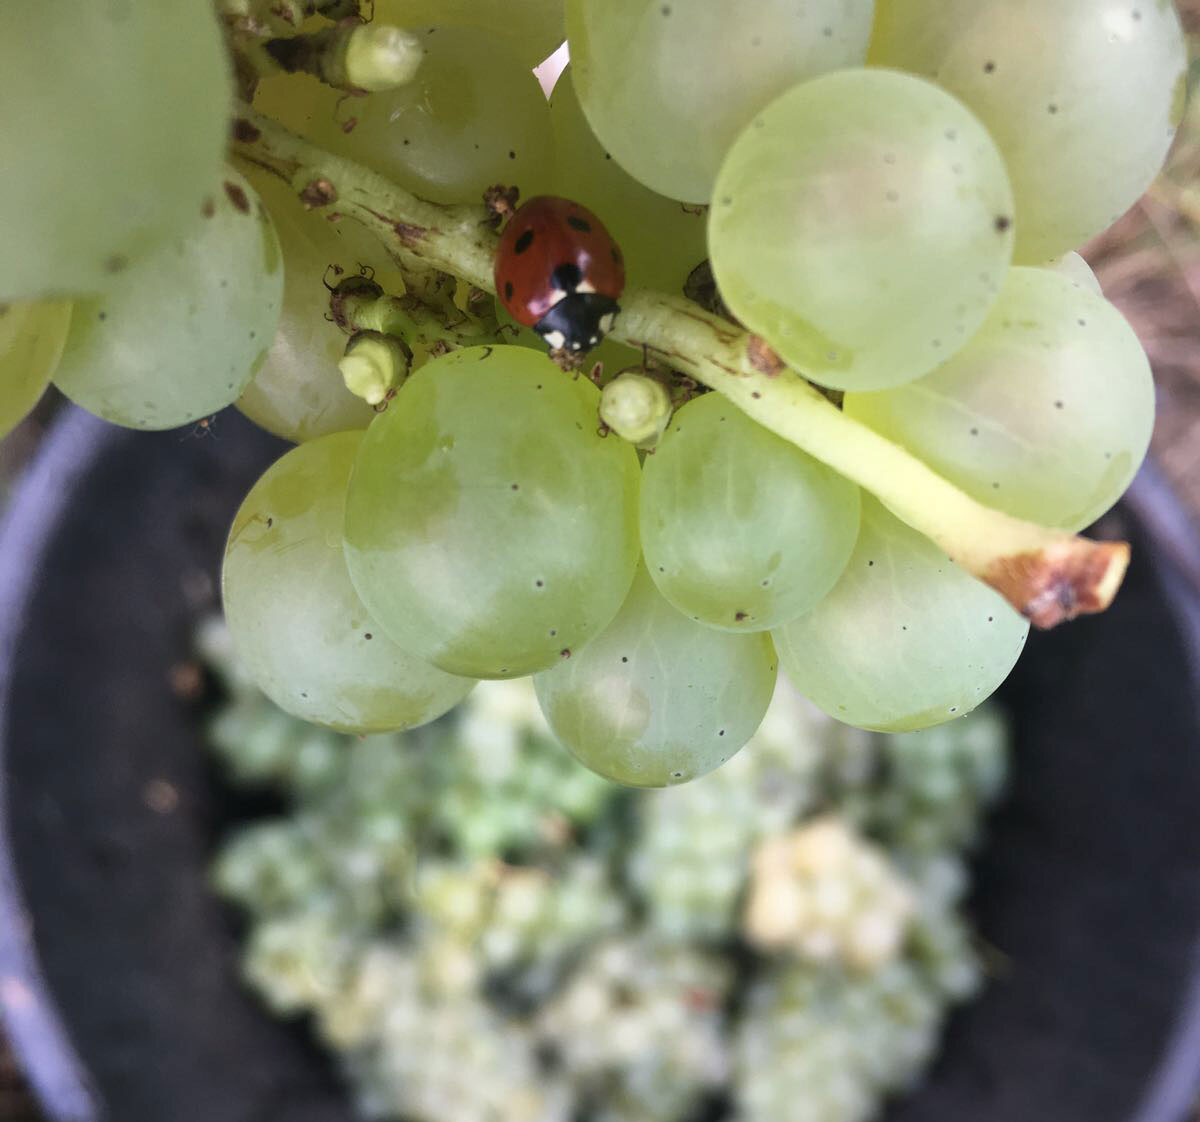 A bunch of white grapes with a lady bug on them.